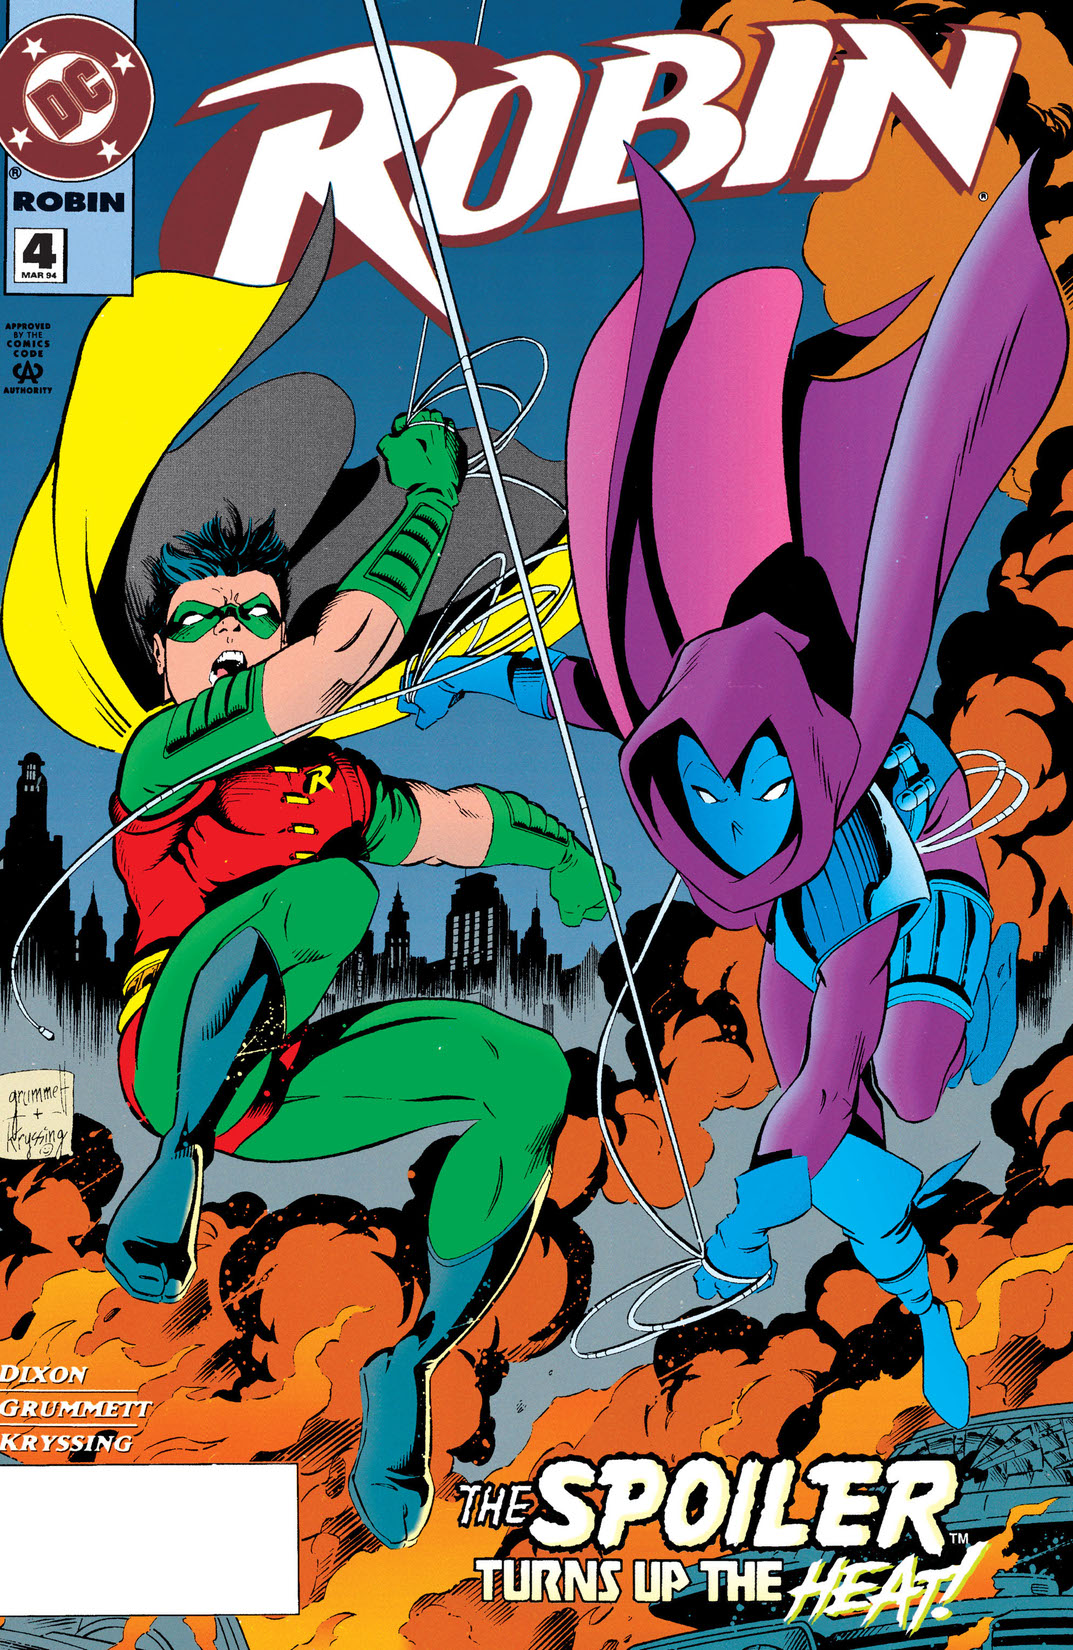 Robin (1993-2009) #4 preview images